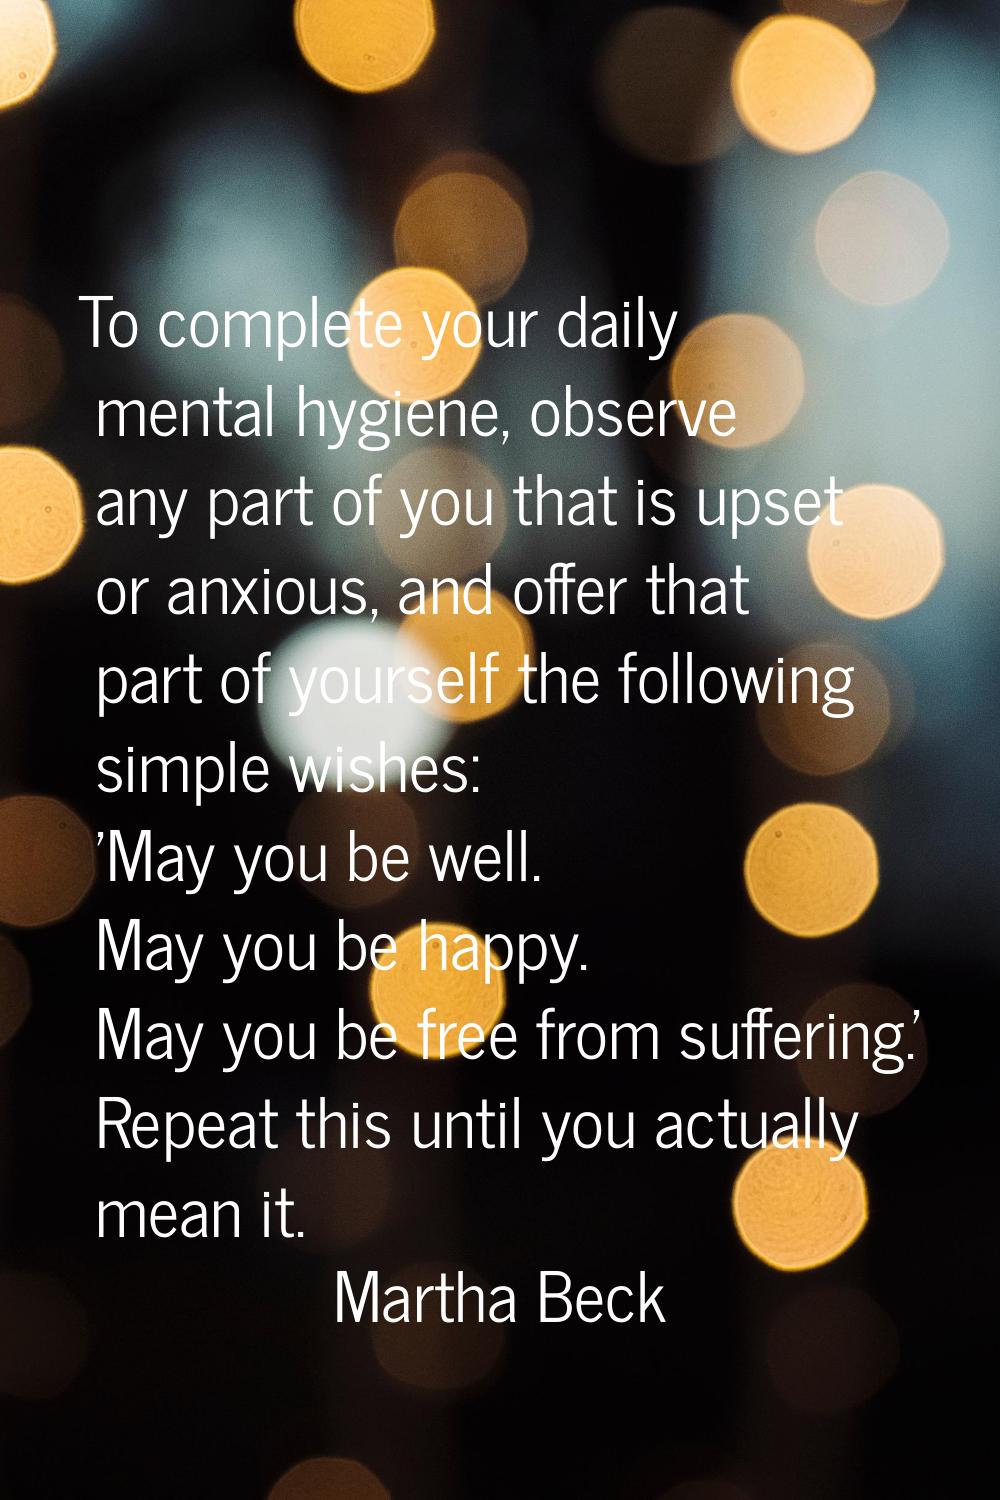 To complete your daily mental hygiene, observe any part of you that is upset or anxious, and offer 